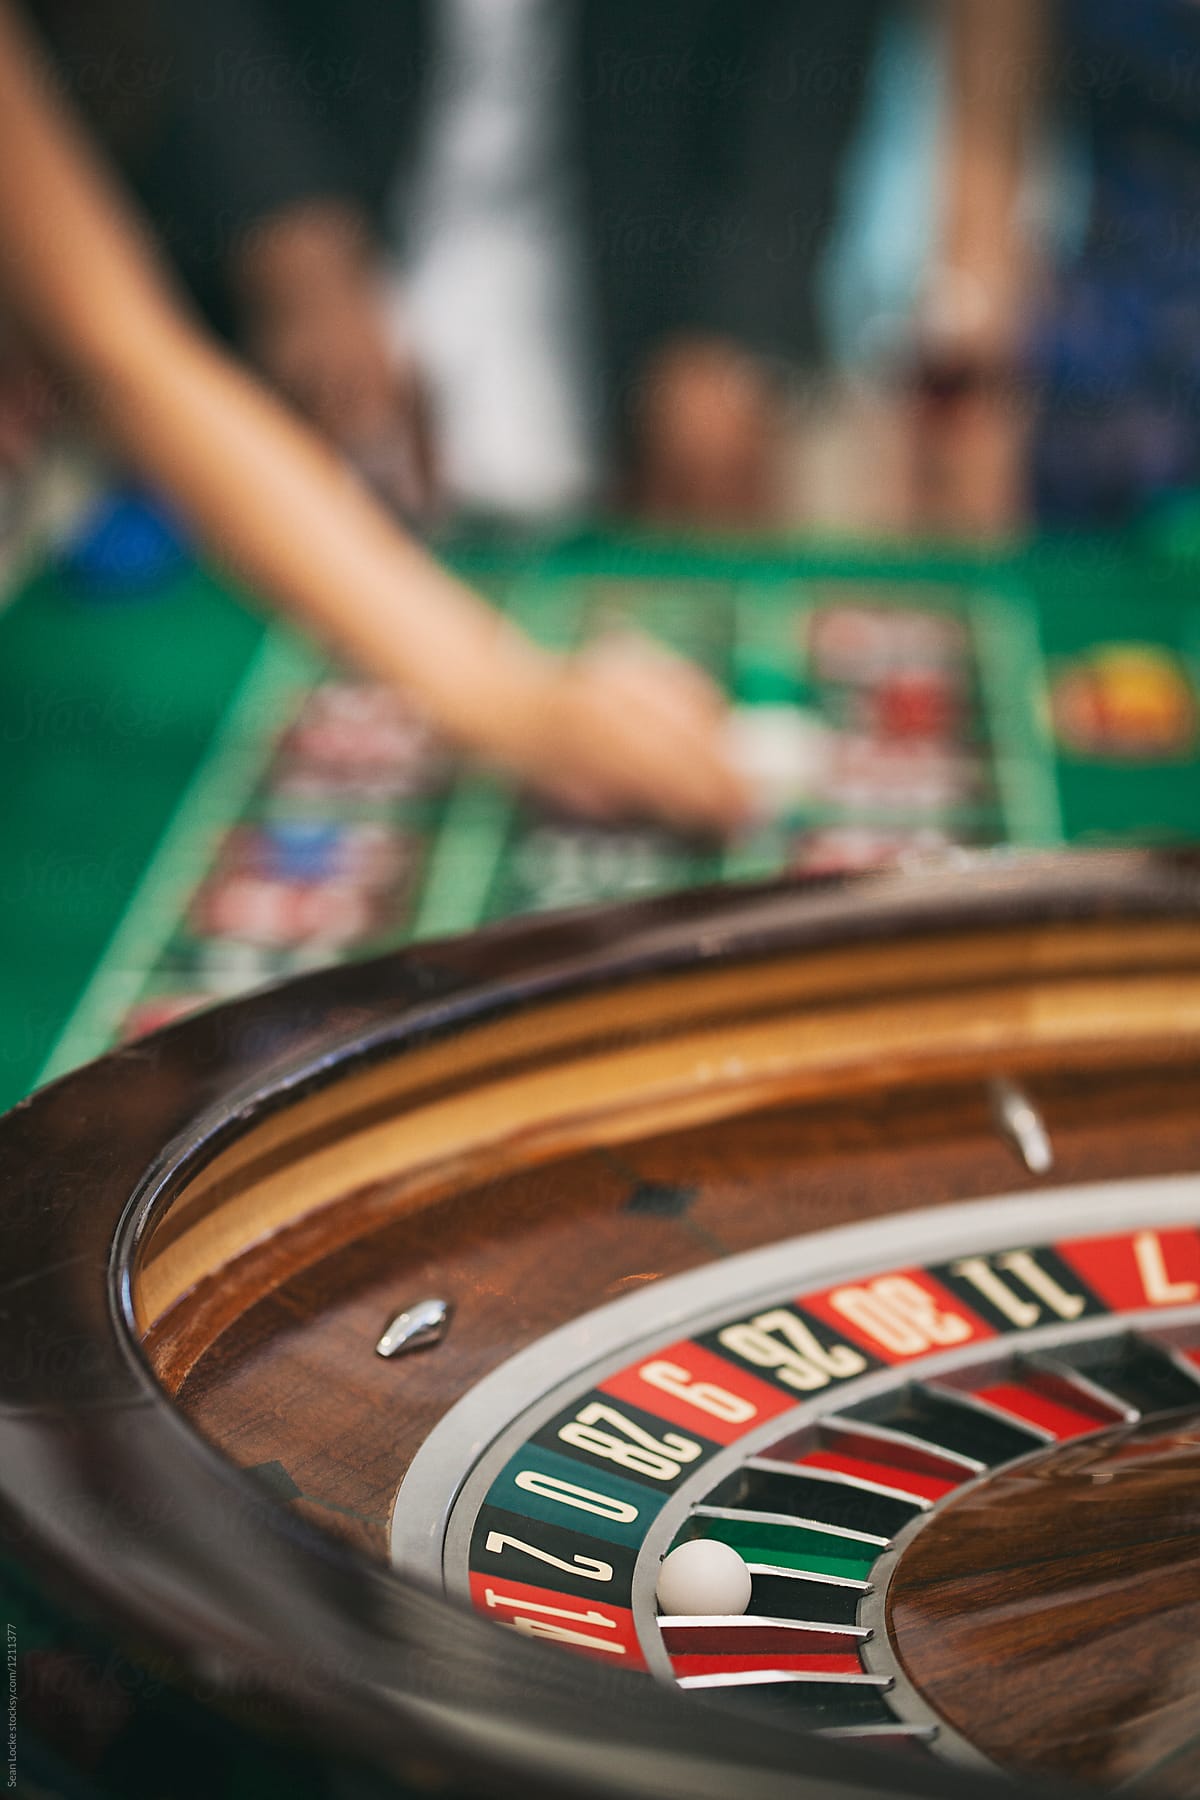 Casino: Focus On Ball In Numbered Slot On Roulette Wheel